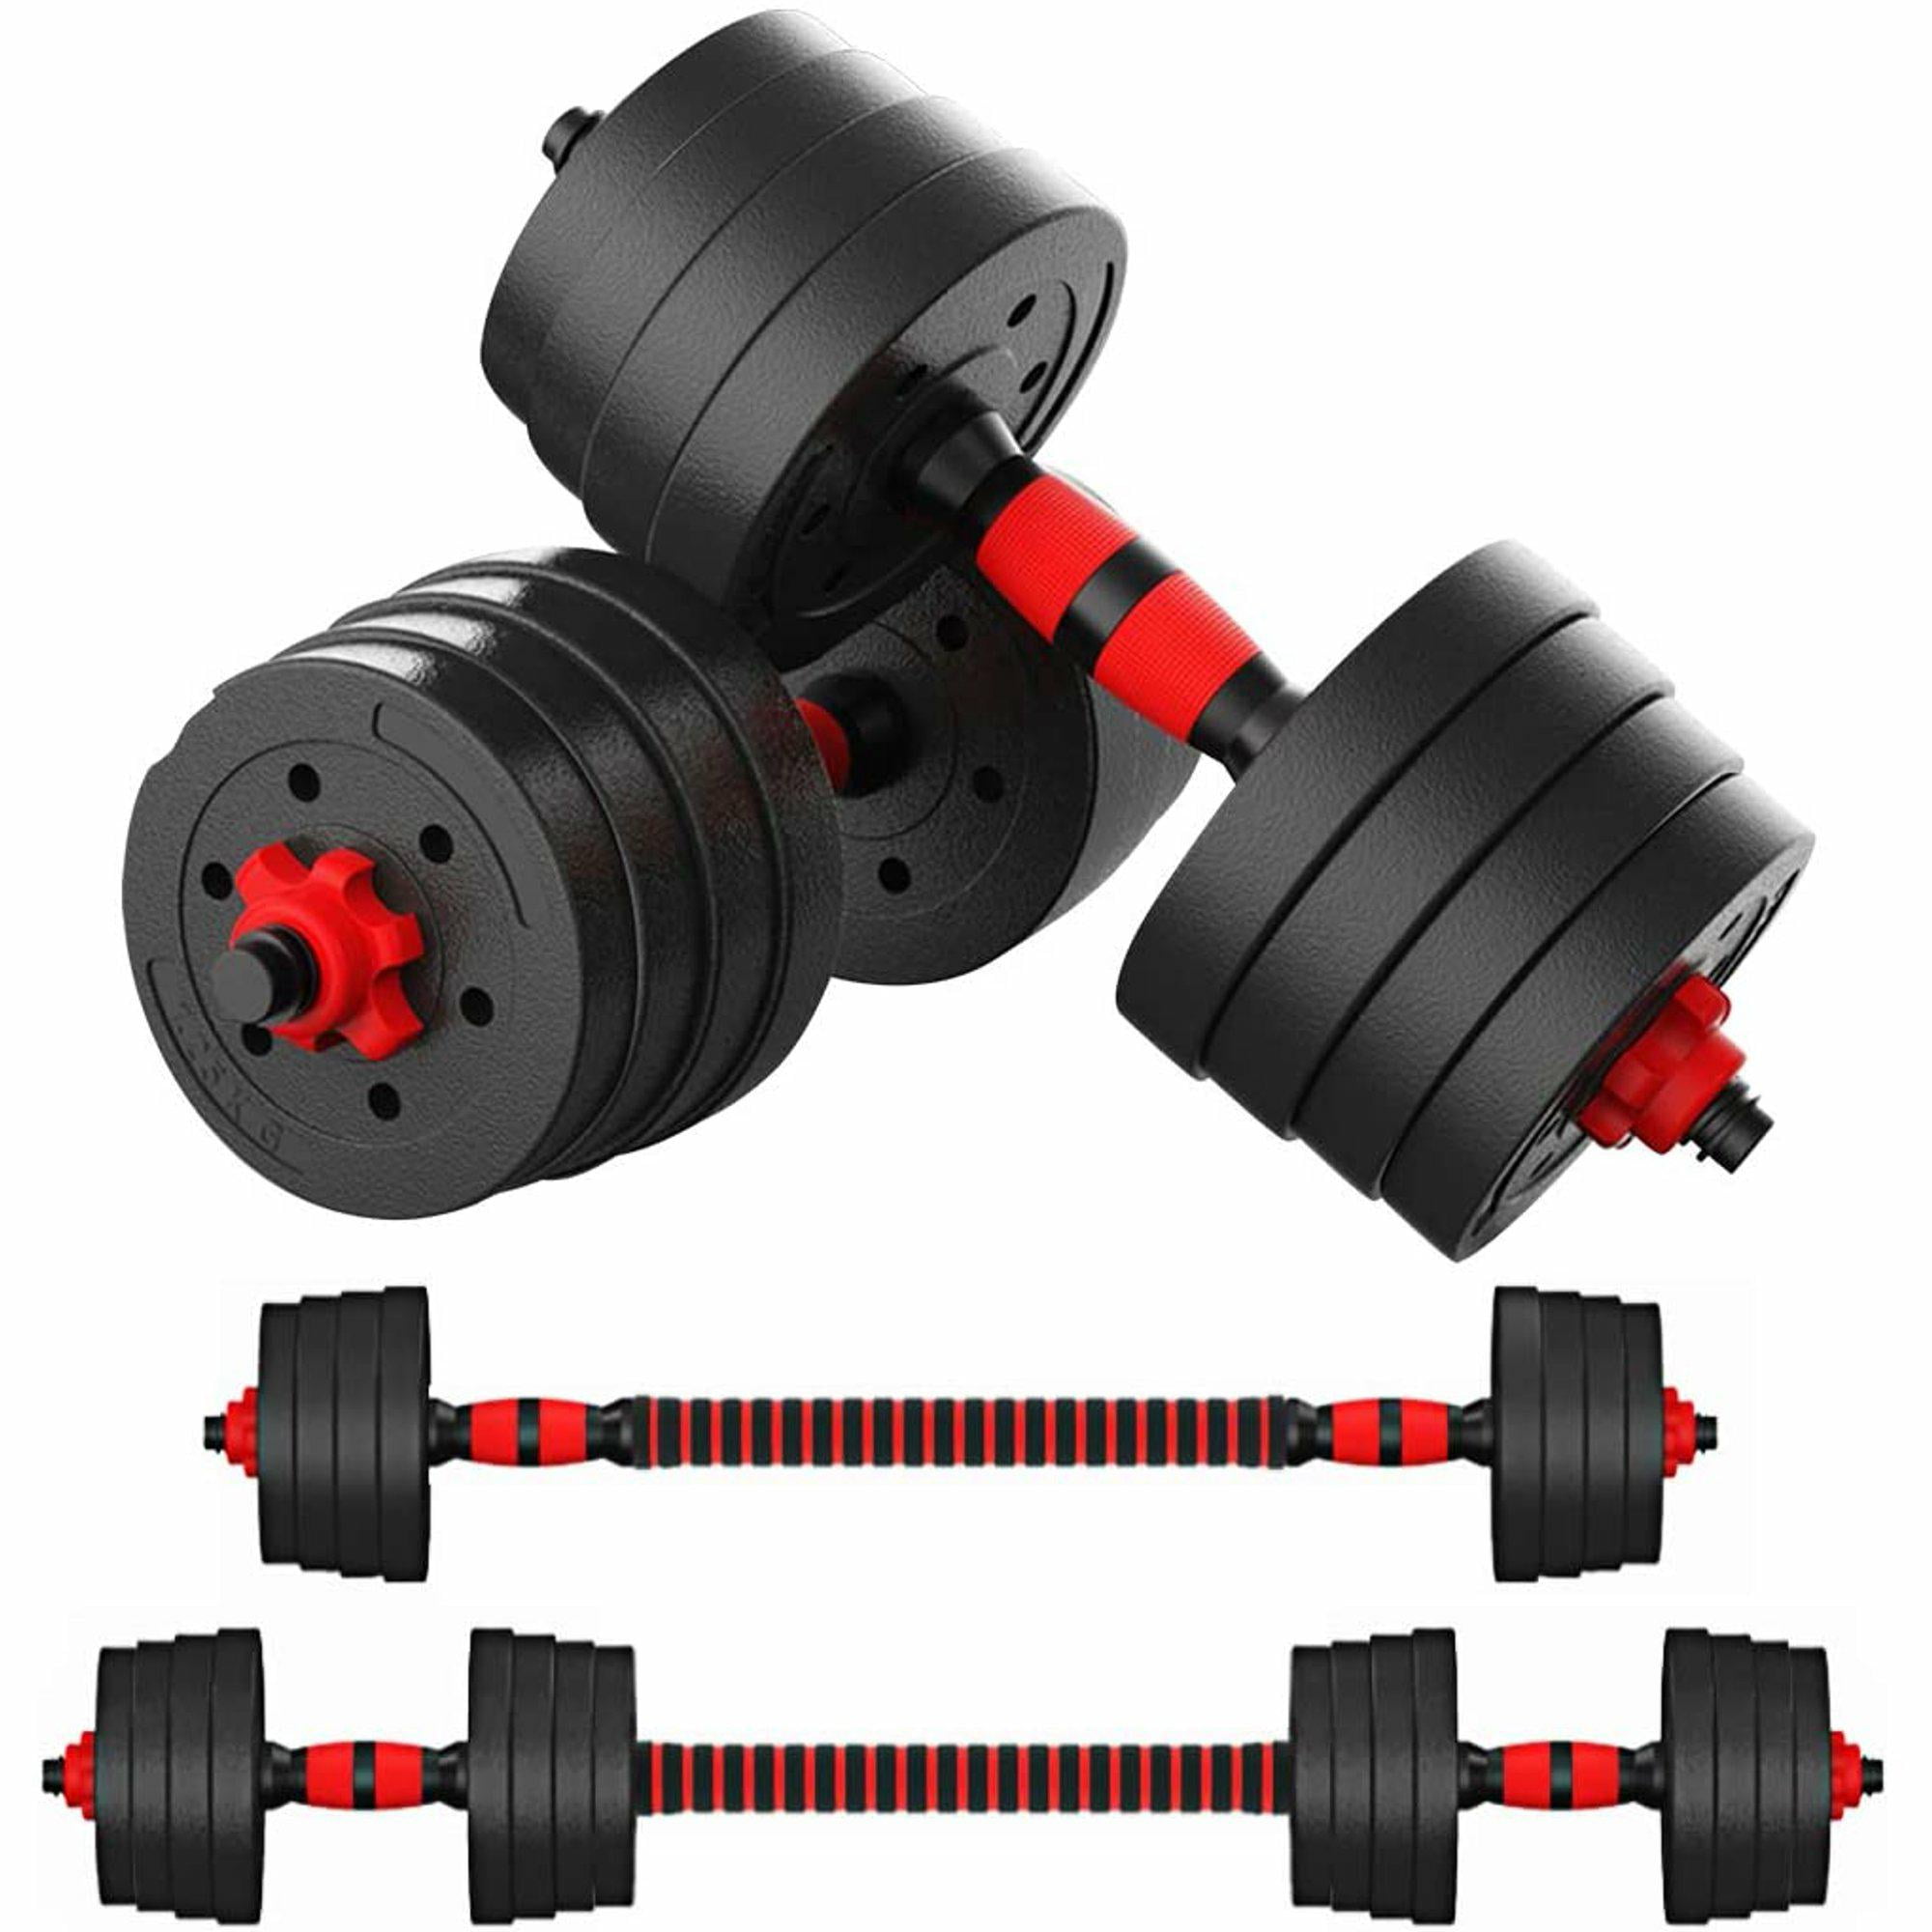 NEW Adjustable Cast Dumbbell Weight Plate With Pair of CAP Handles 60lbs Total 